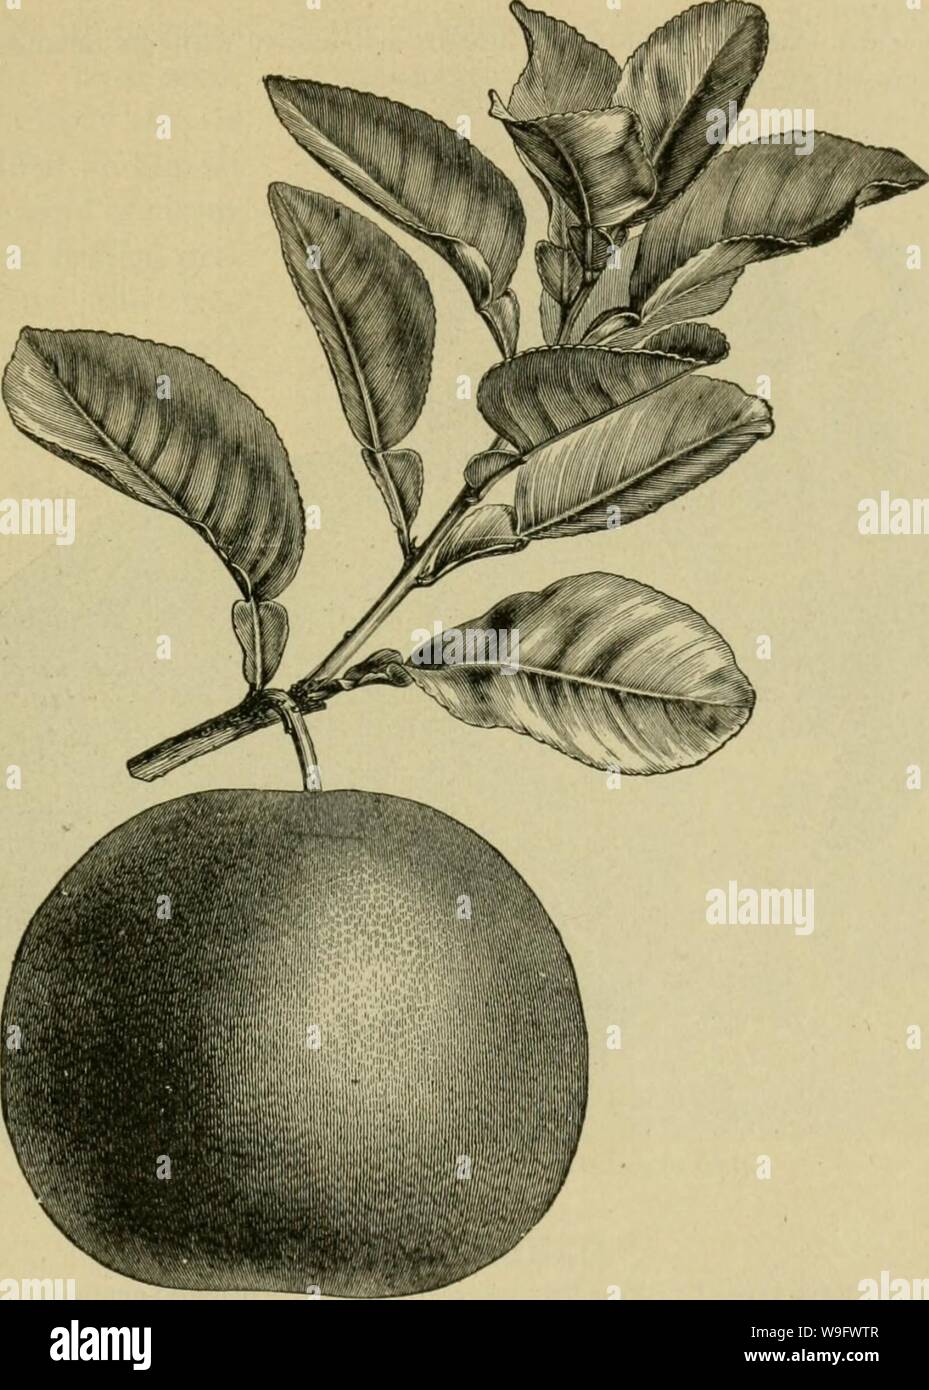 Archive image from page 76 of Culture of the citrus in. Culture of the citrus in California  cultureofcitrusi00lelo Year: 1902 ( THE ORANGE IN CALIFORNIA—VARIETIES. 73 THE SHADDOCK. Citrus aurantium, var. Decuviana, Willd. SEEDLINGS.—Hypocotyl very short, subterranean. Cotyledons subterranean, and remaining in the seeil till they decay, oblong- elliptic, obtuse, i)lano-convex, Heshy, sessile, and Ixith directed to one side.    Fruiting branch of Shaddocli (Citrus (ZecHmnna)—reduced. greenish-yellow above, yellowisli beneath, somewhat falcate, 13 mm. long and 6 mm. wide. Stem, soon becoming woo Stock Photo